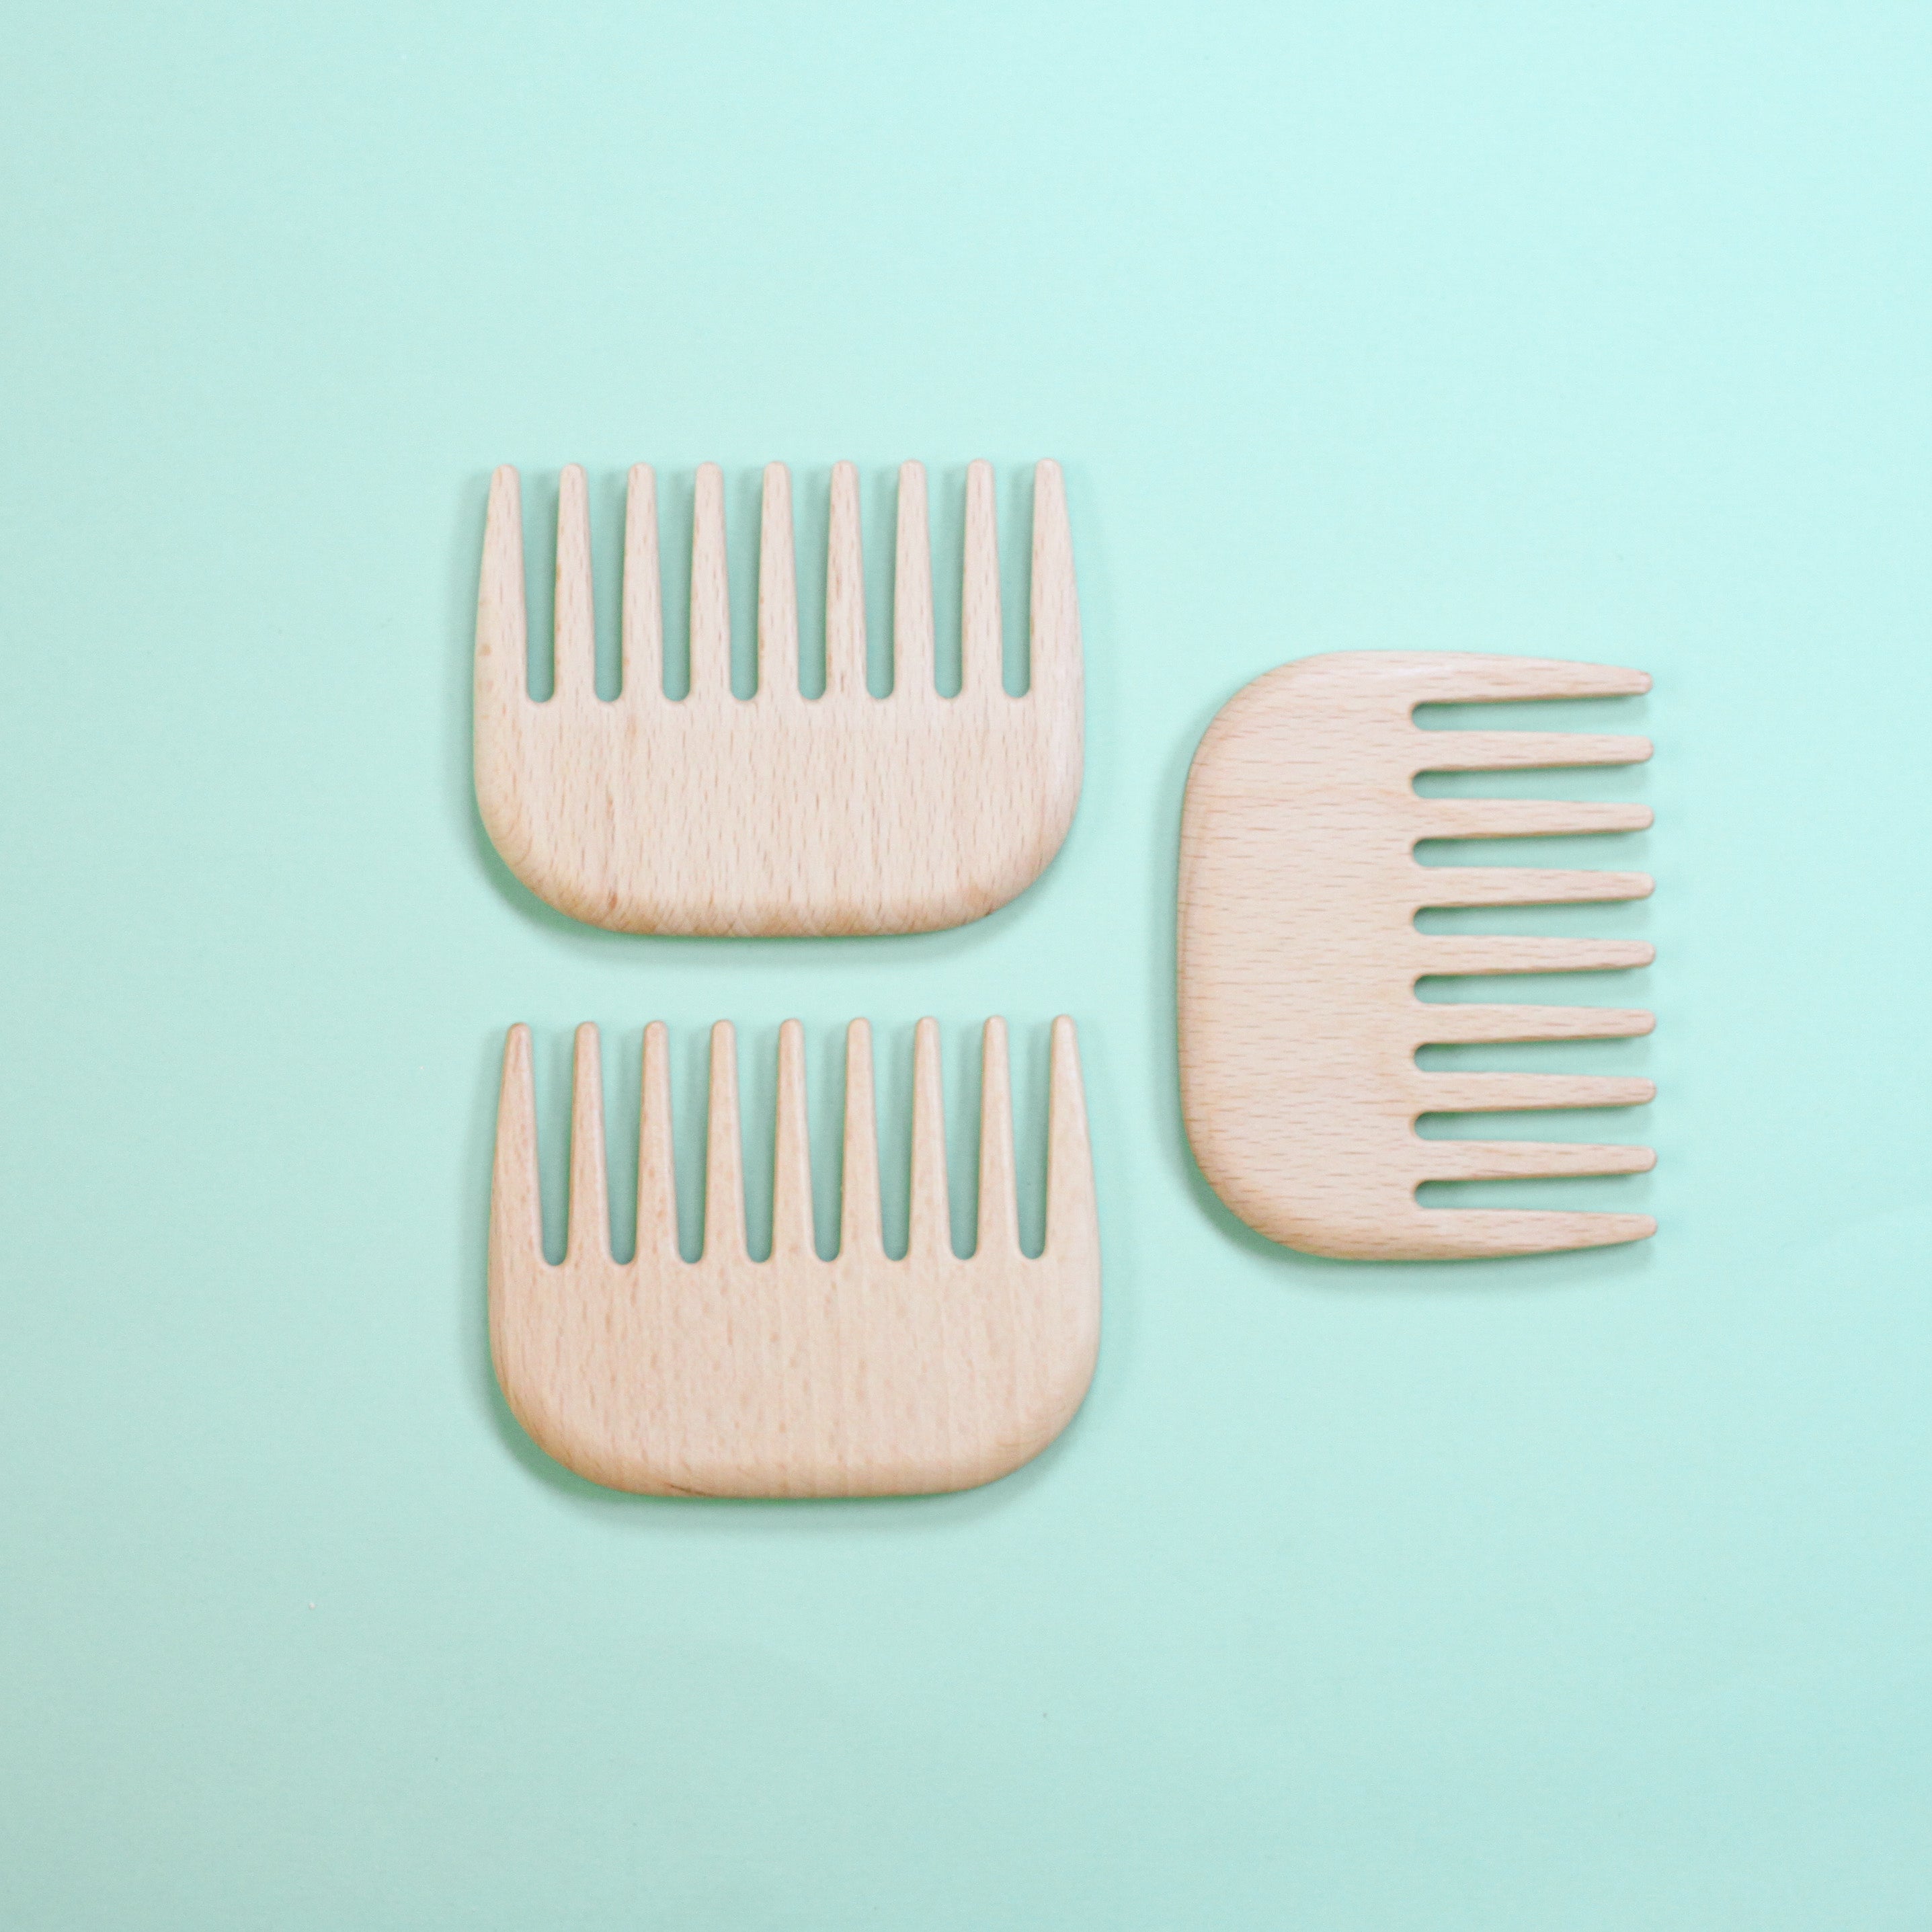 Redecker Wide Tooth Comb